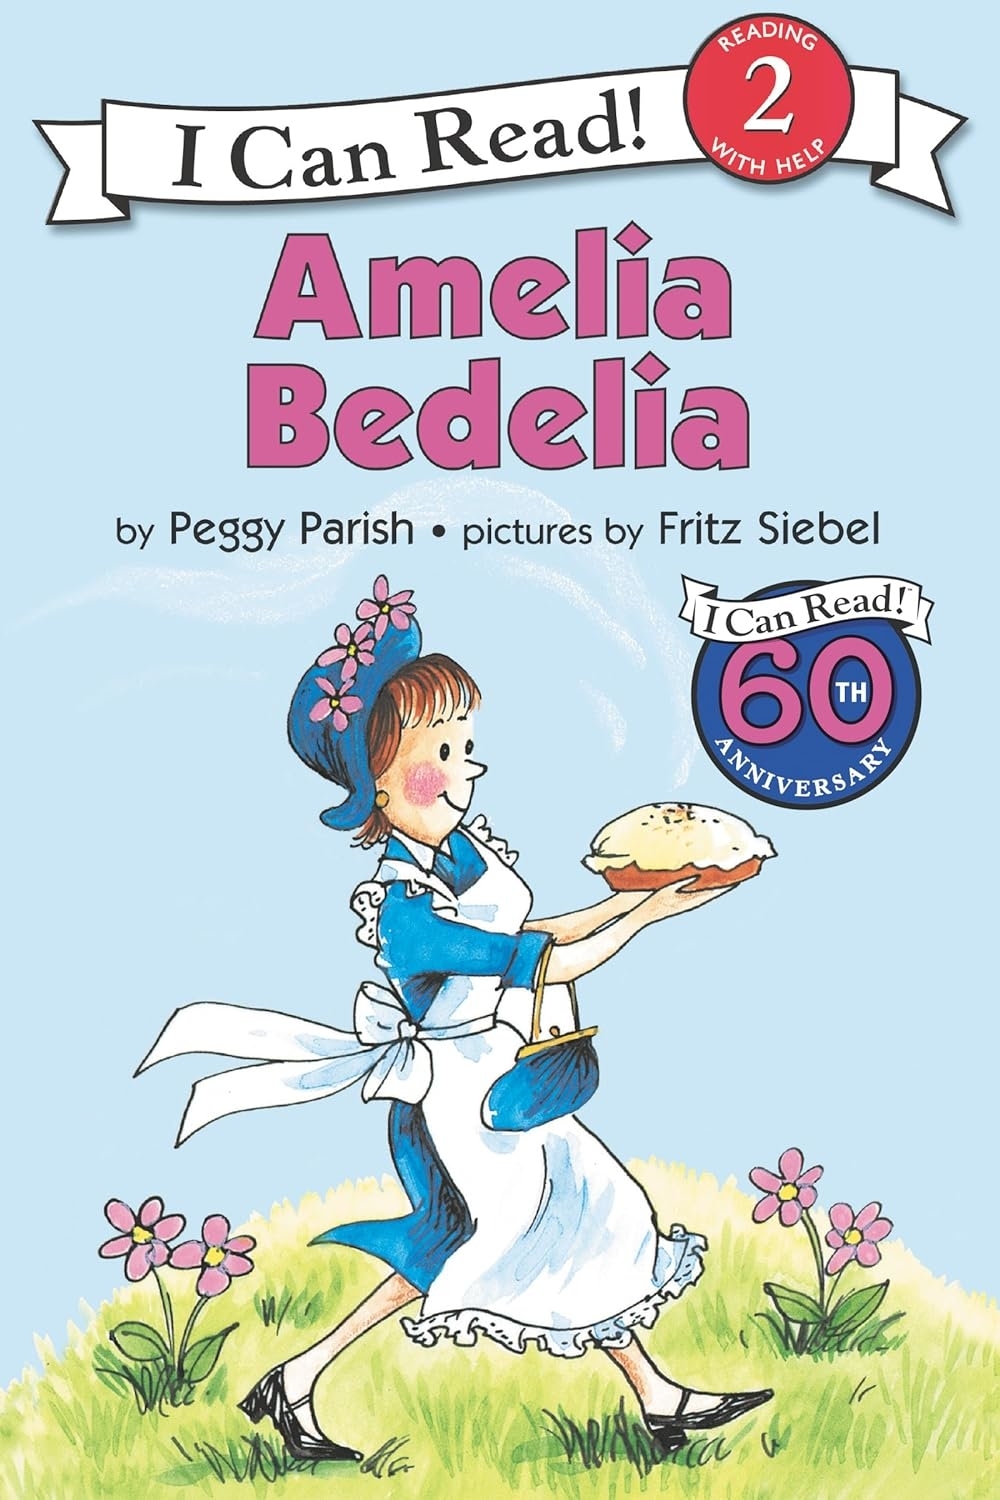 Book cover of &quot;Amelia Bedelia&quot; showing the character holding a pie, with text for author and illustrative credits